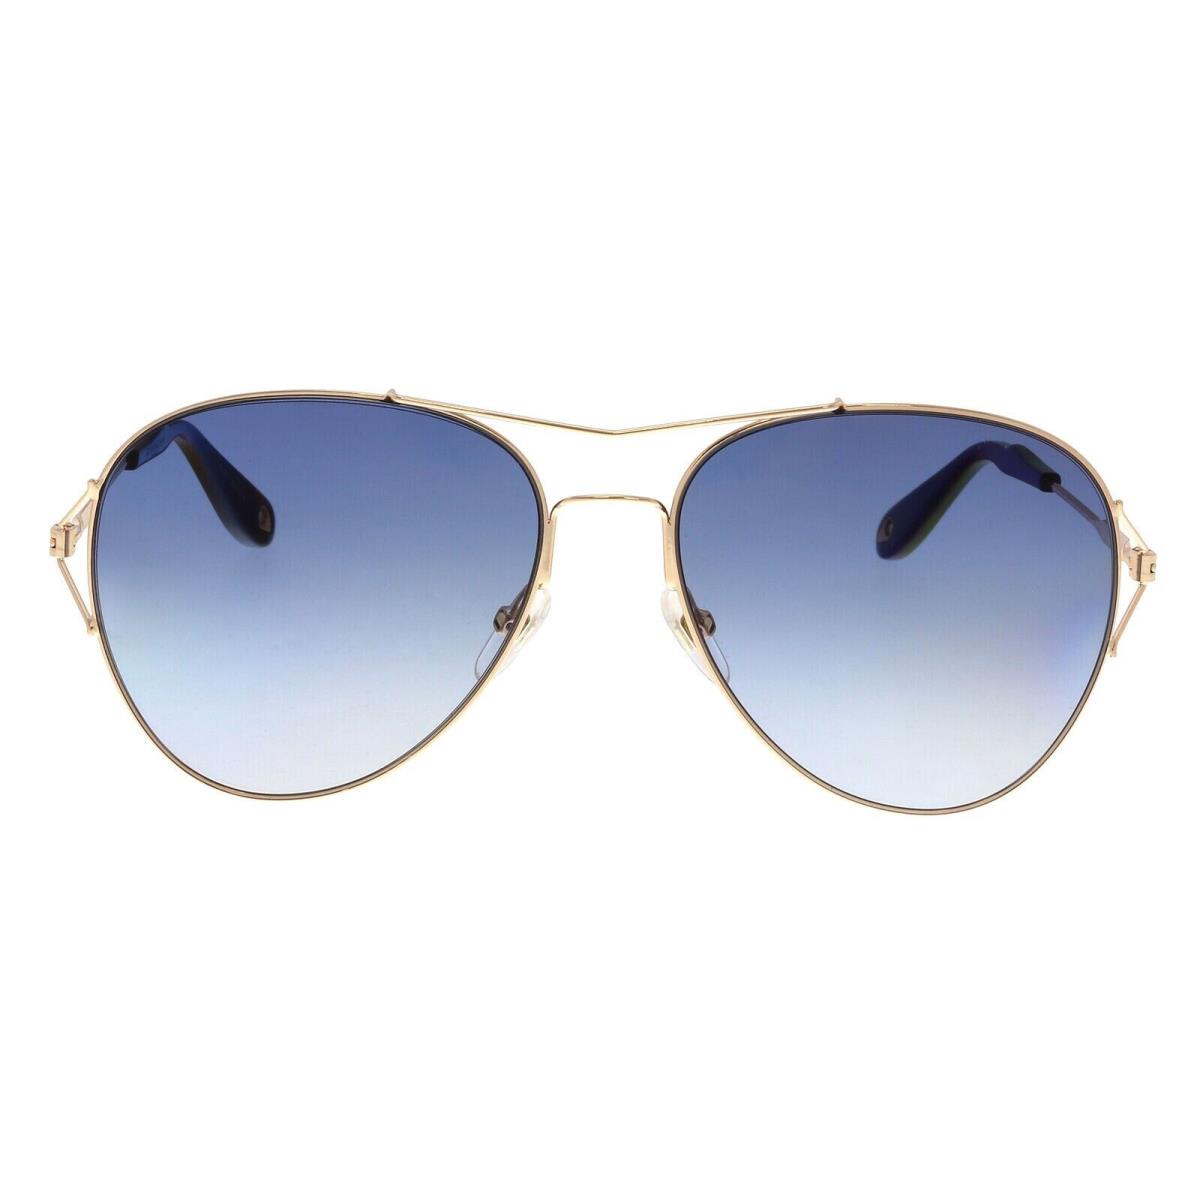 Givenchy GV7005/S Ddb DD Gold Aviator Sunglasses - Gold, Frame: Gold, Lens: Blue Gradient